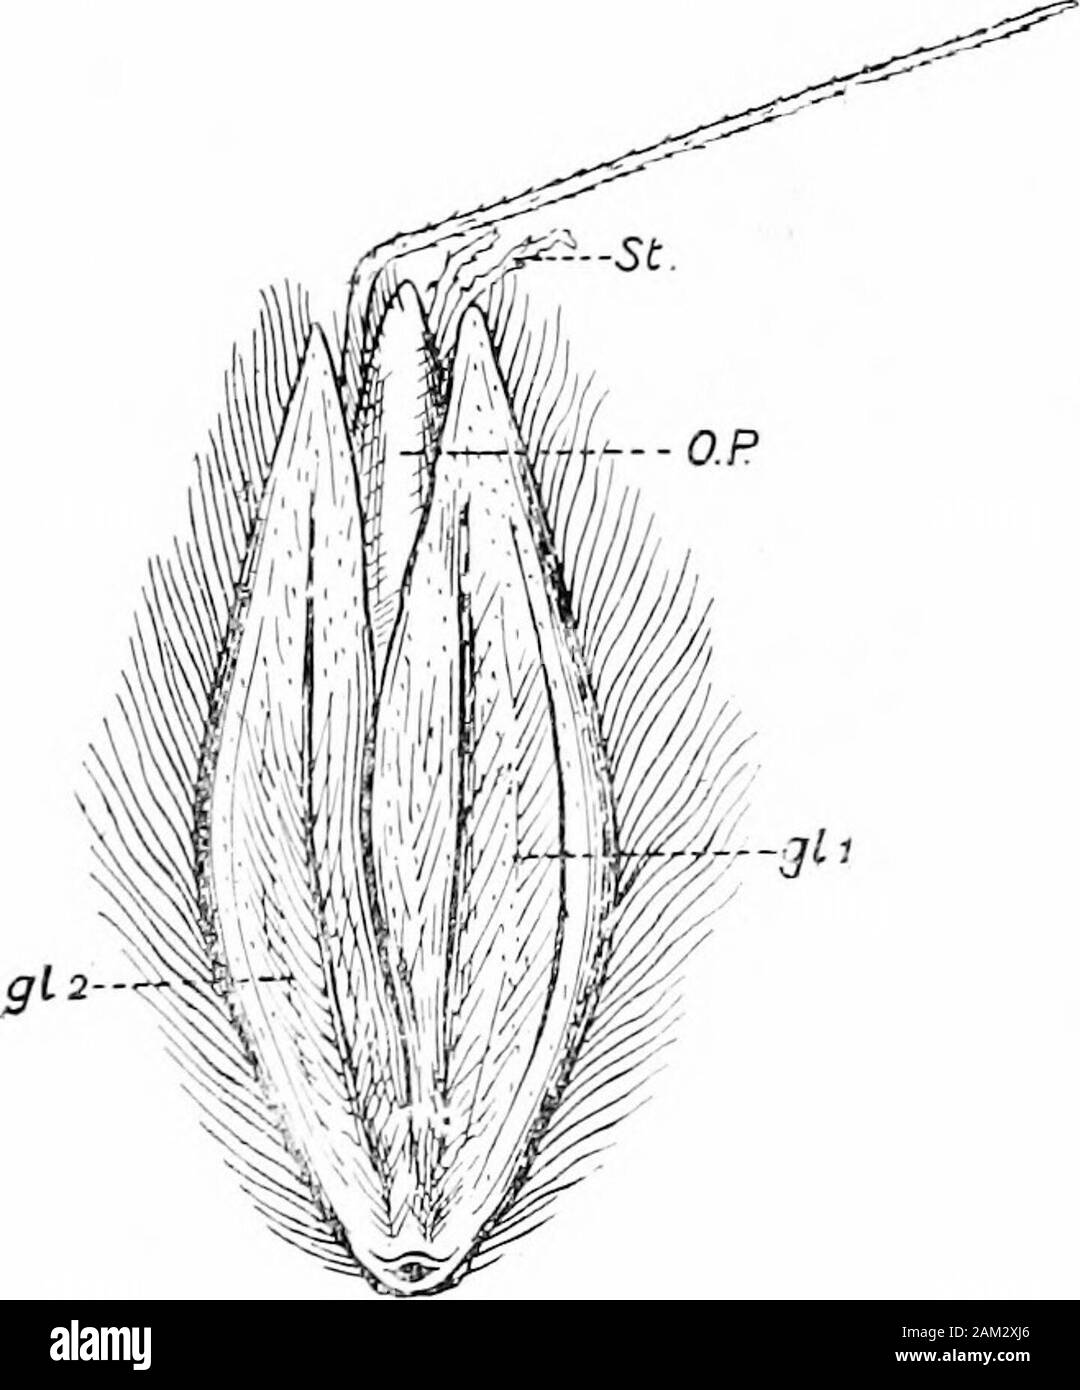 British grasses and their employment in agriculture . airy margins.8weet scented. Abundant in Britain. Fig. 44. Spike-like panicles of Alopecums pratensis, L. showing four stages ofdevelopment. Left to right, (a) emerging from the inflated sheath, (b) withstigmas just in the receptive condition, (c) with stamens fully protruded, and(d) the post-flowering condition. About 5 nat. size. Flowers in April and May; panicle close, and spike-like. 1 to?1 inches long. Spikelets one-flowered, 8-9 mm. long. Twopairs of empty glumes are present; the lower or oute ter pair unequal ch. Ail] Botanical Descri Stock Photo